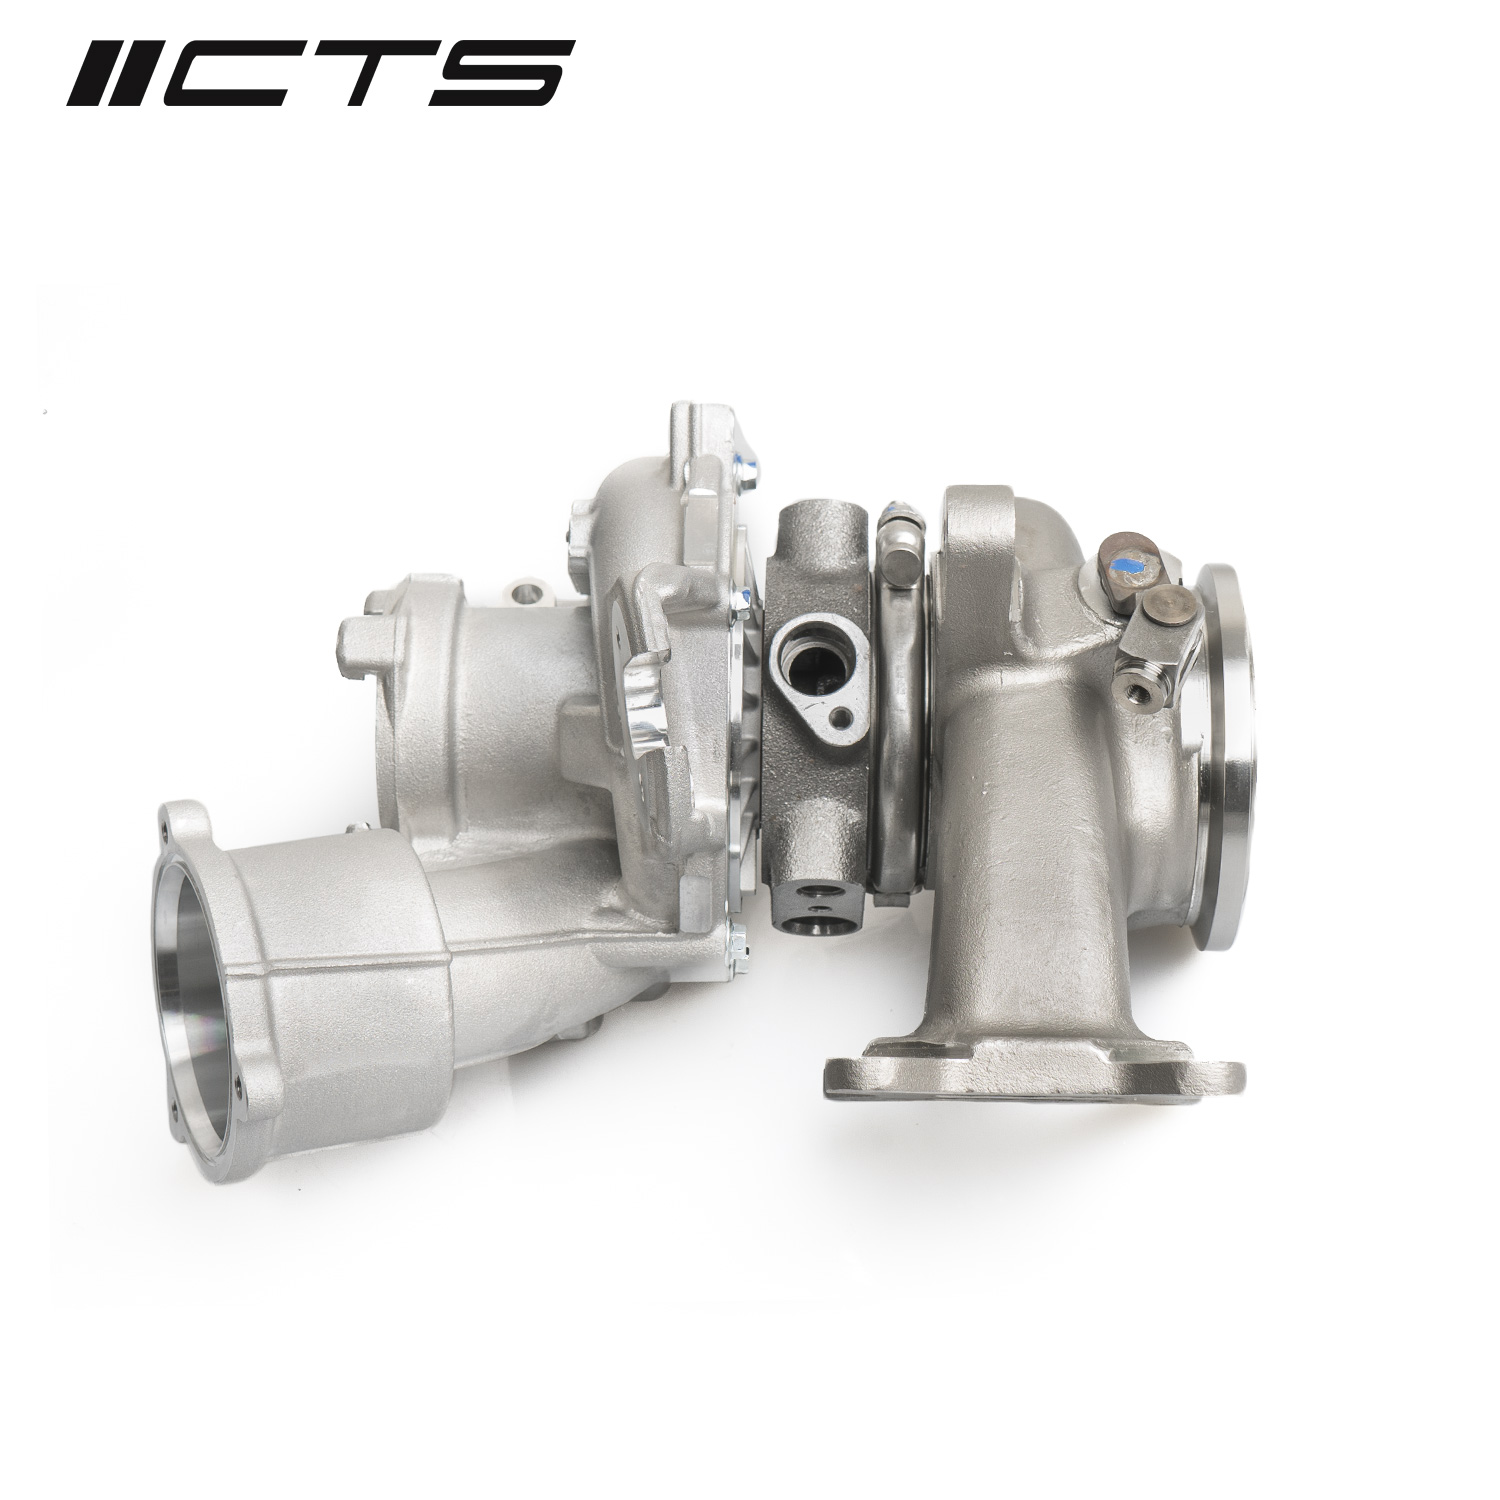 CTS Turbo IS38 Replacement Turbocharger for MQB Golf/GTI/Golf R, Audi A3/S3  (2015+) - CTS TURBO